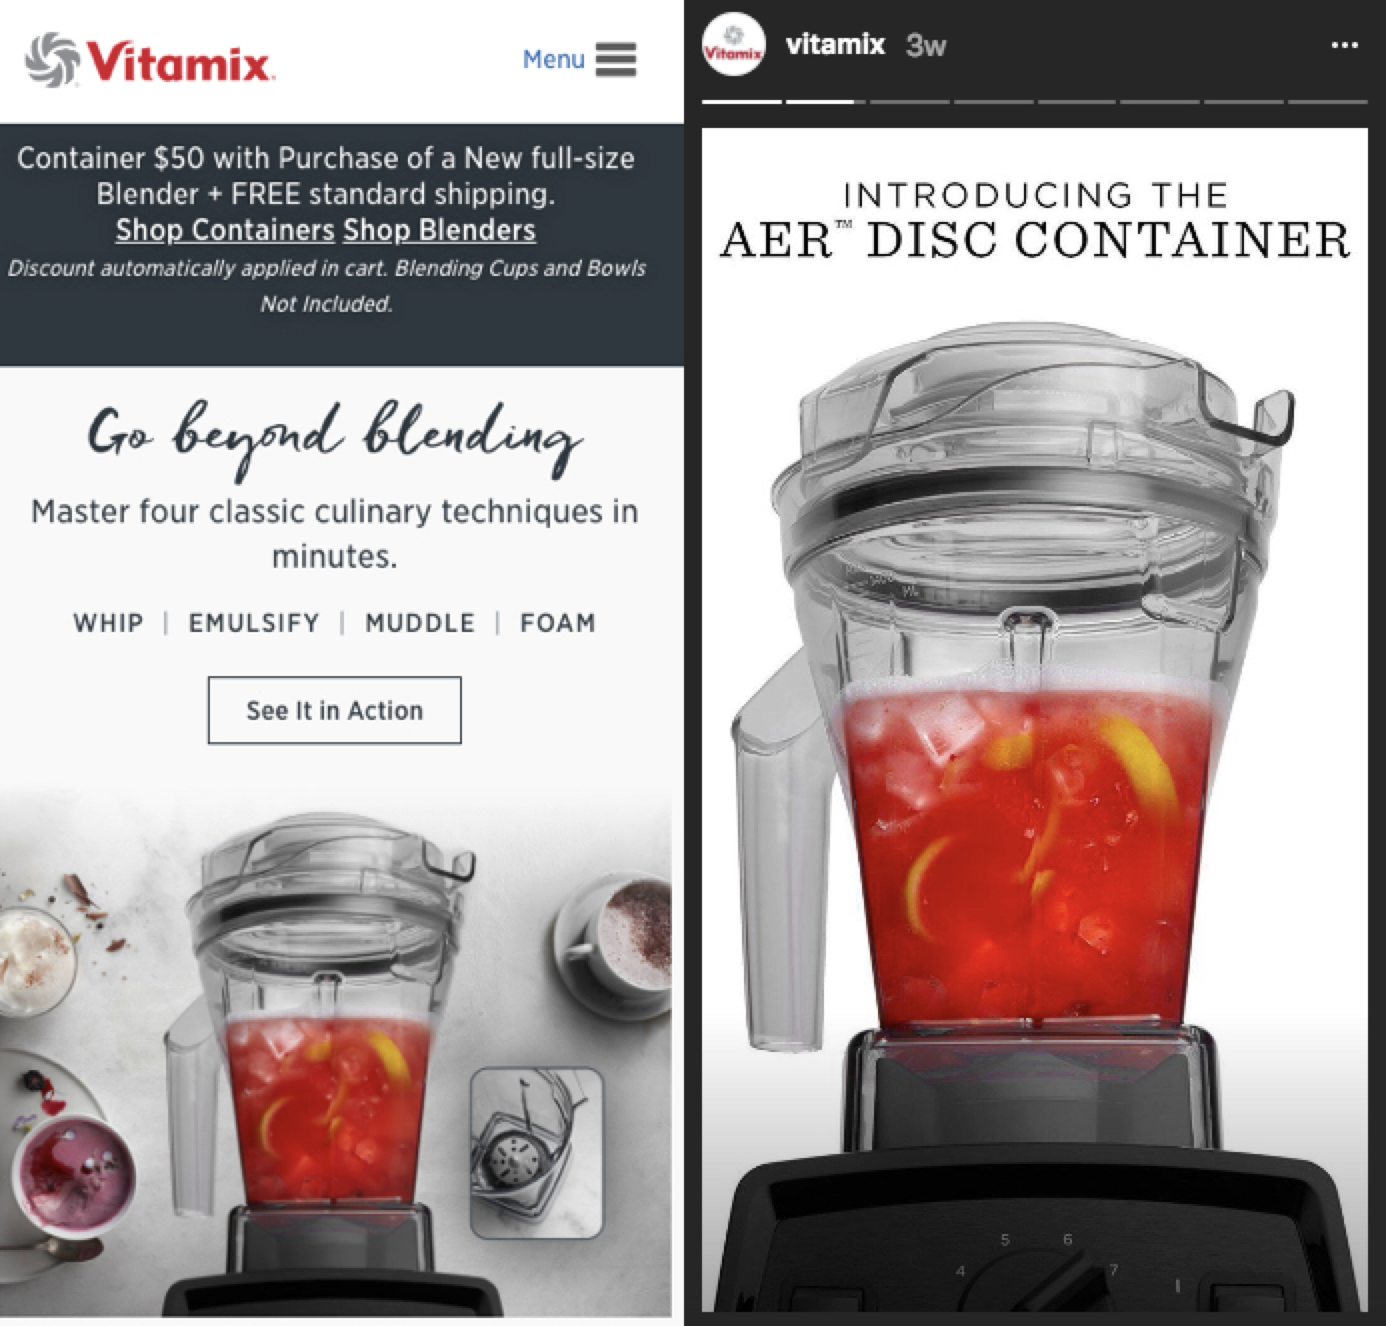 Vitamix Instagram post showing off new product